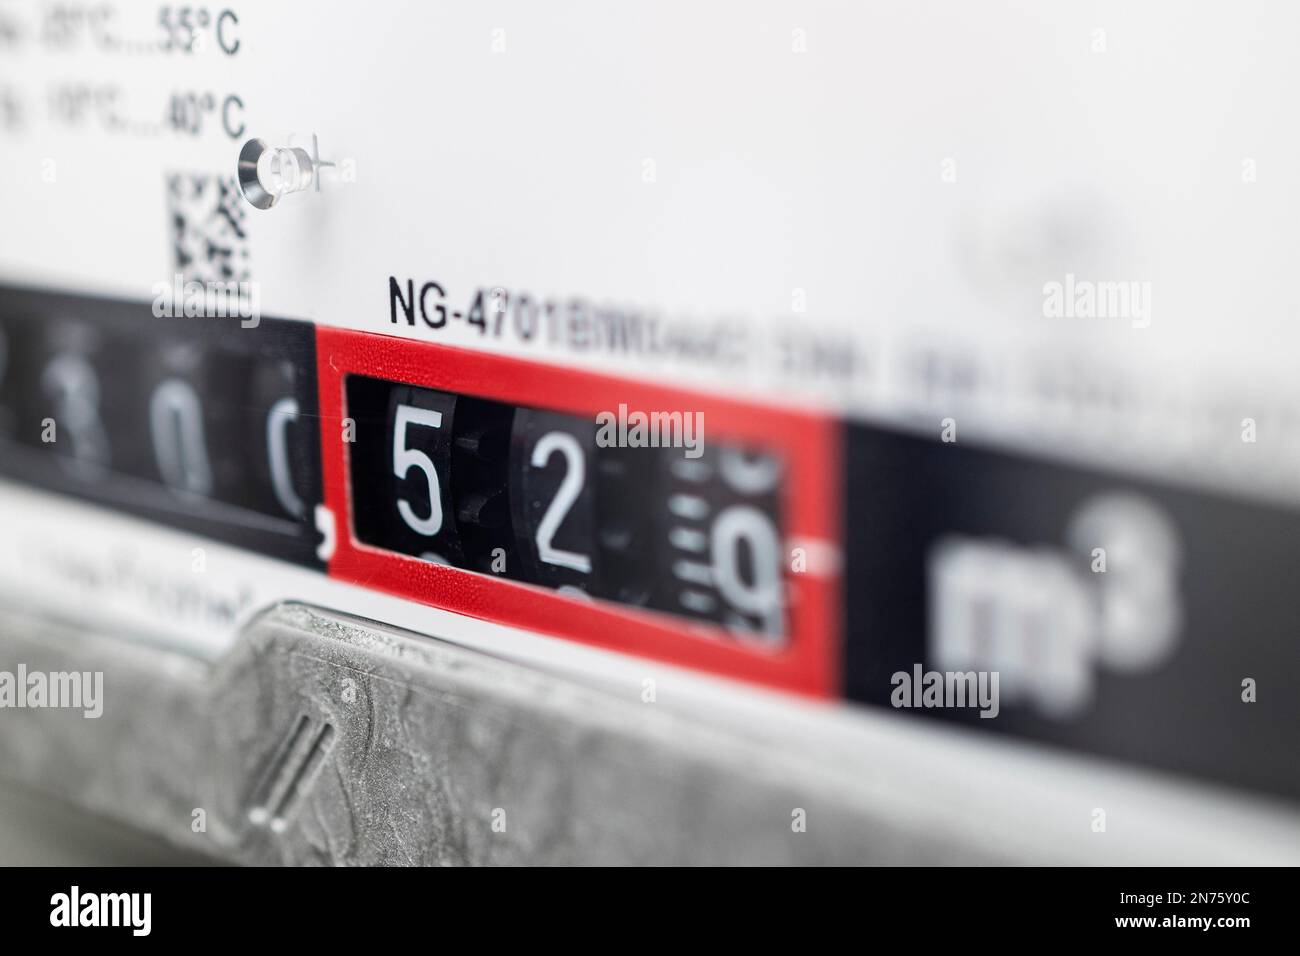 Gas meter in basement, meter reading, gas consumption, reading value, blur, detail, symbol image, energy cost, Stock Photo